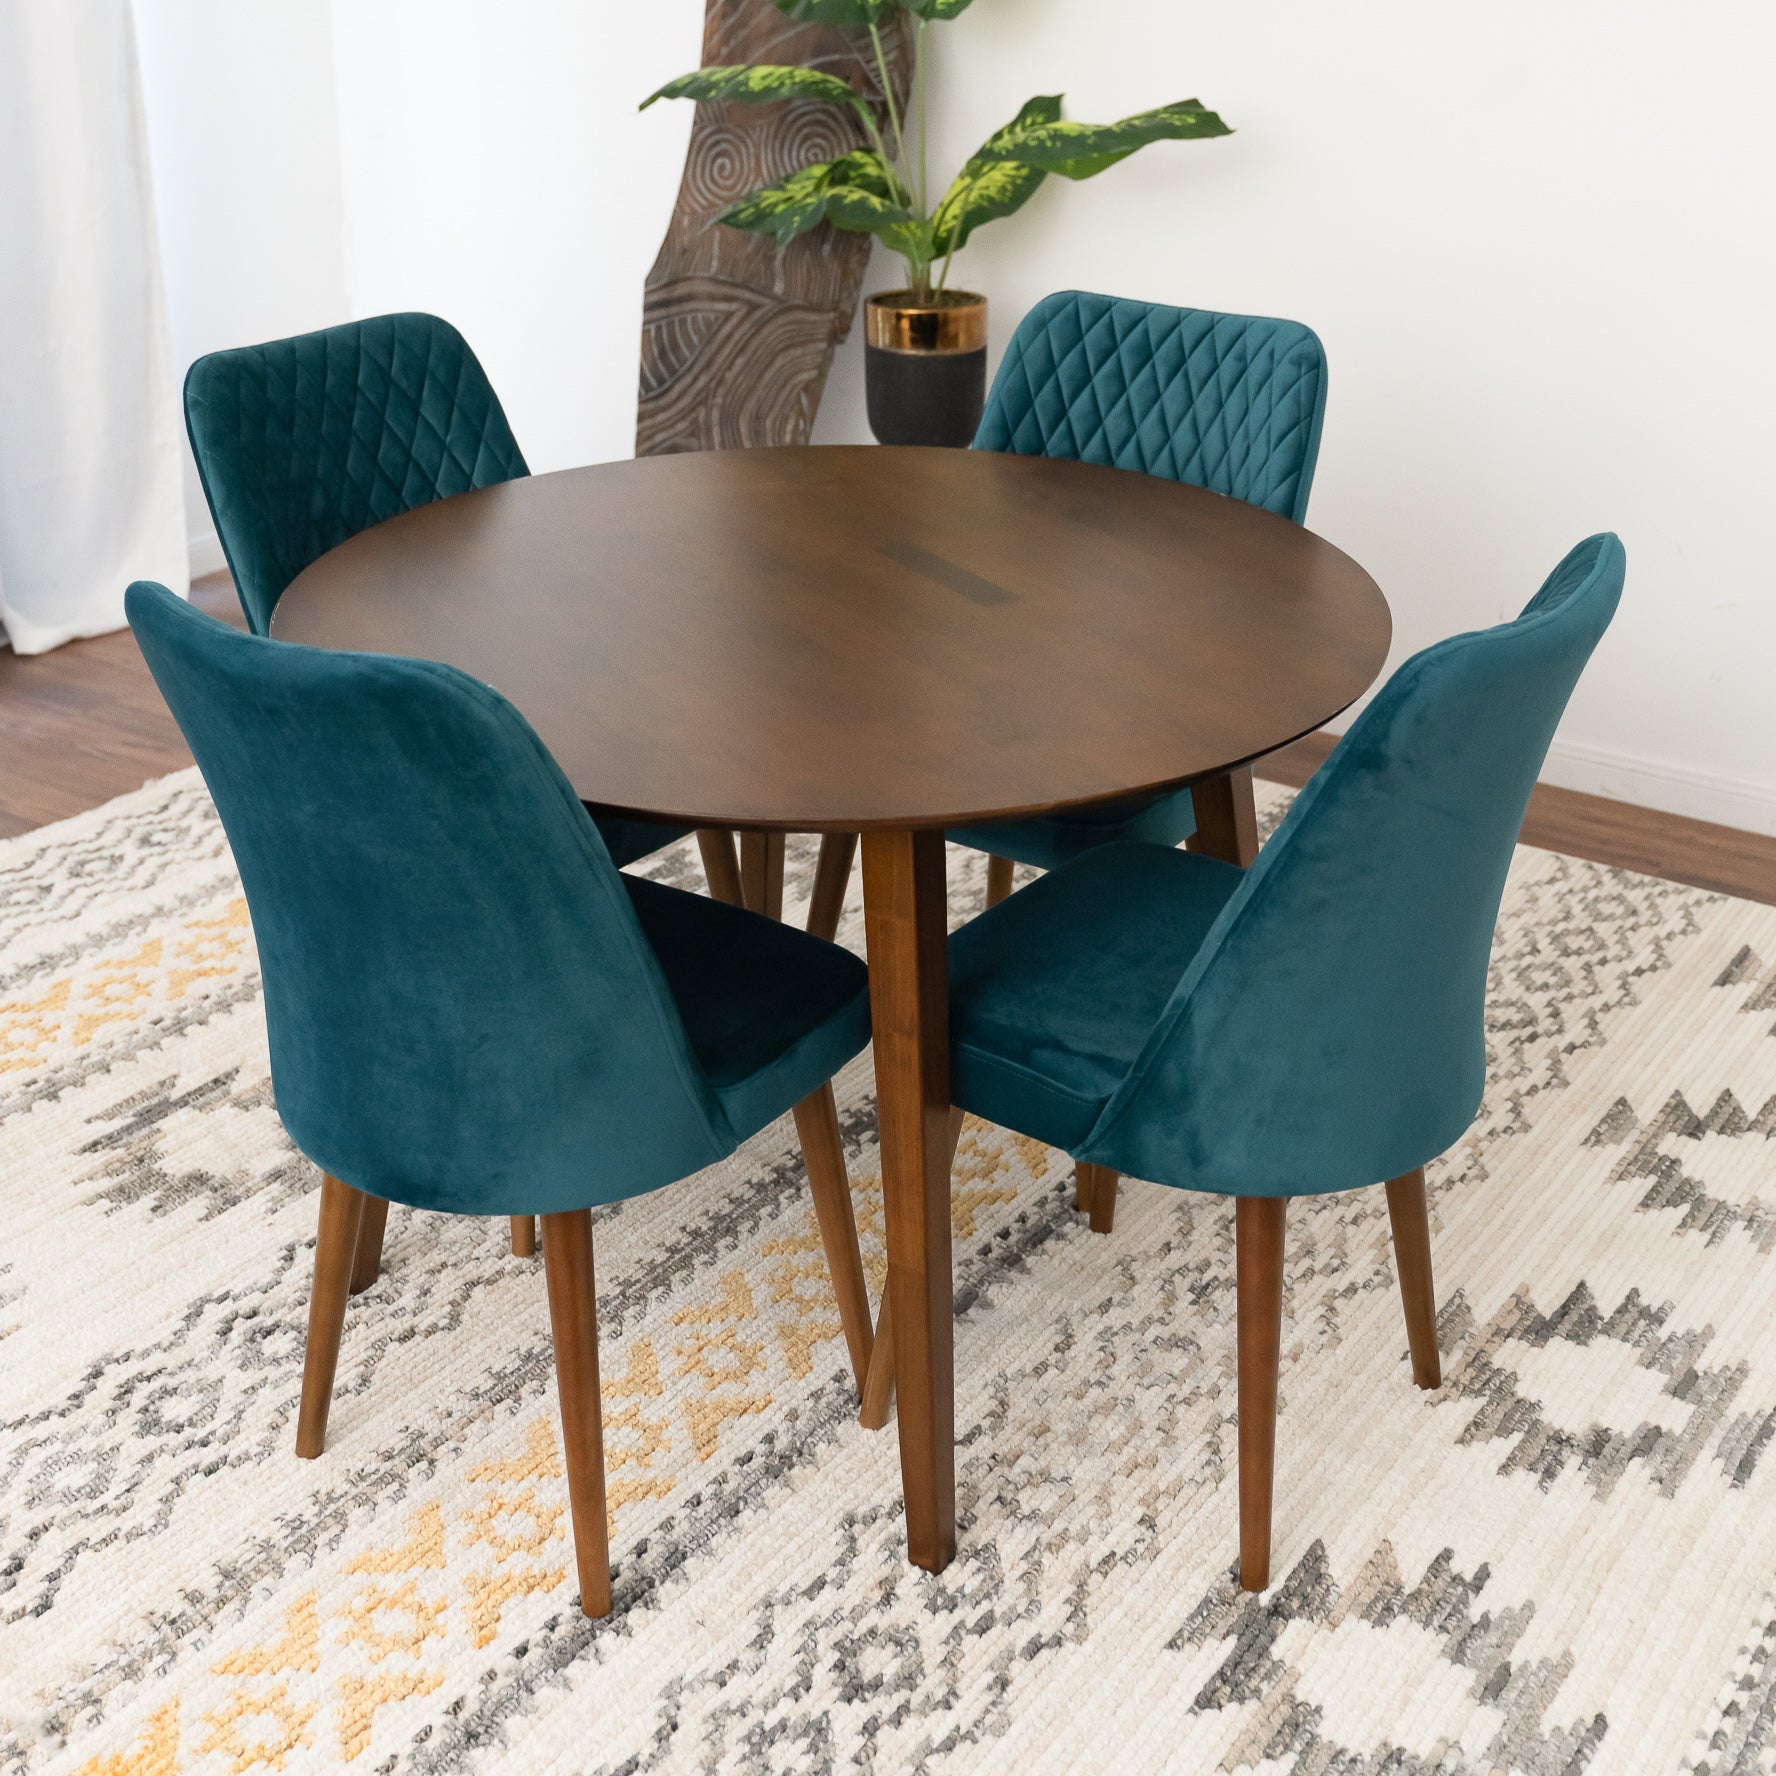 Palmer Dining set with 4 Evette Teal Dining Chairs (Walnut)